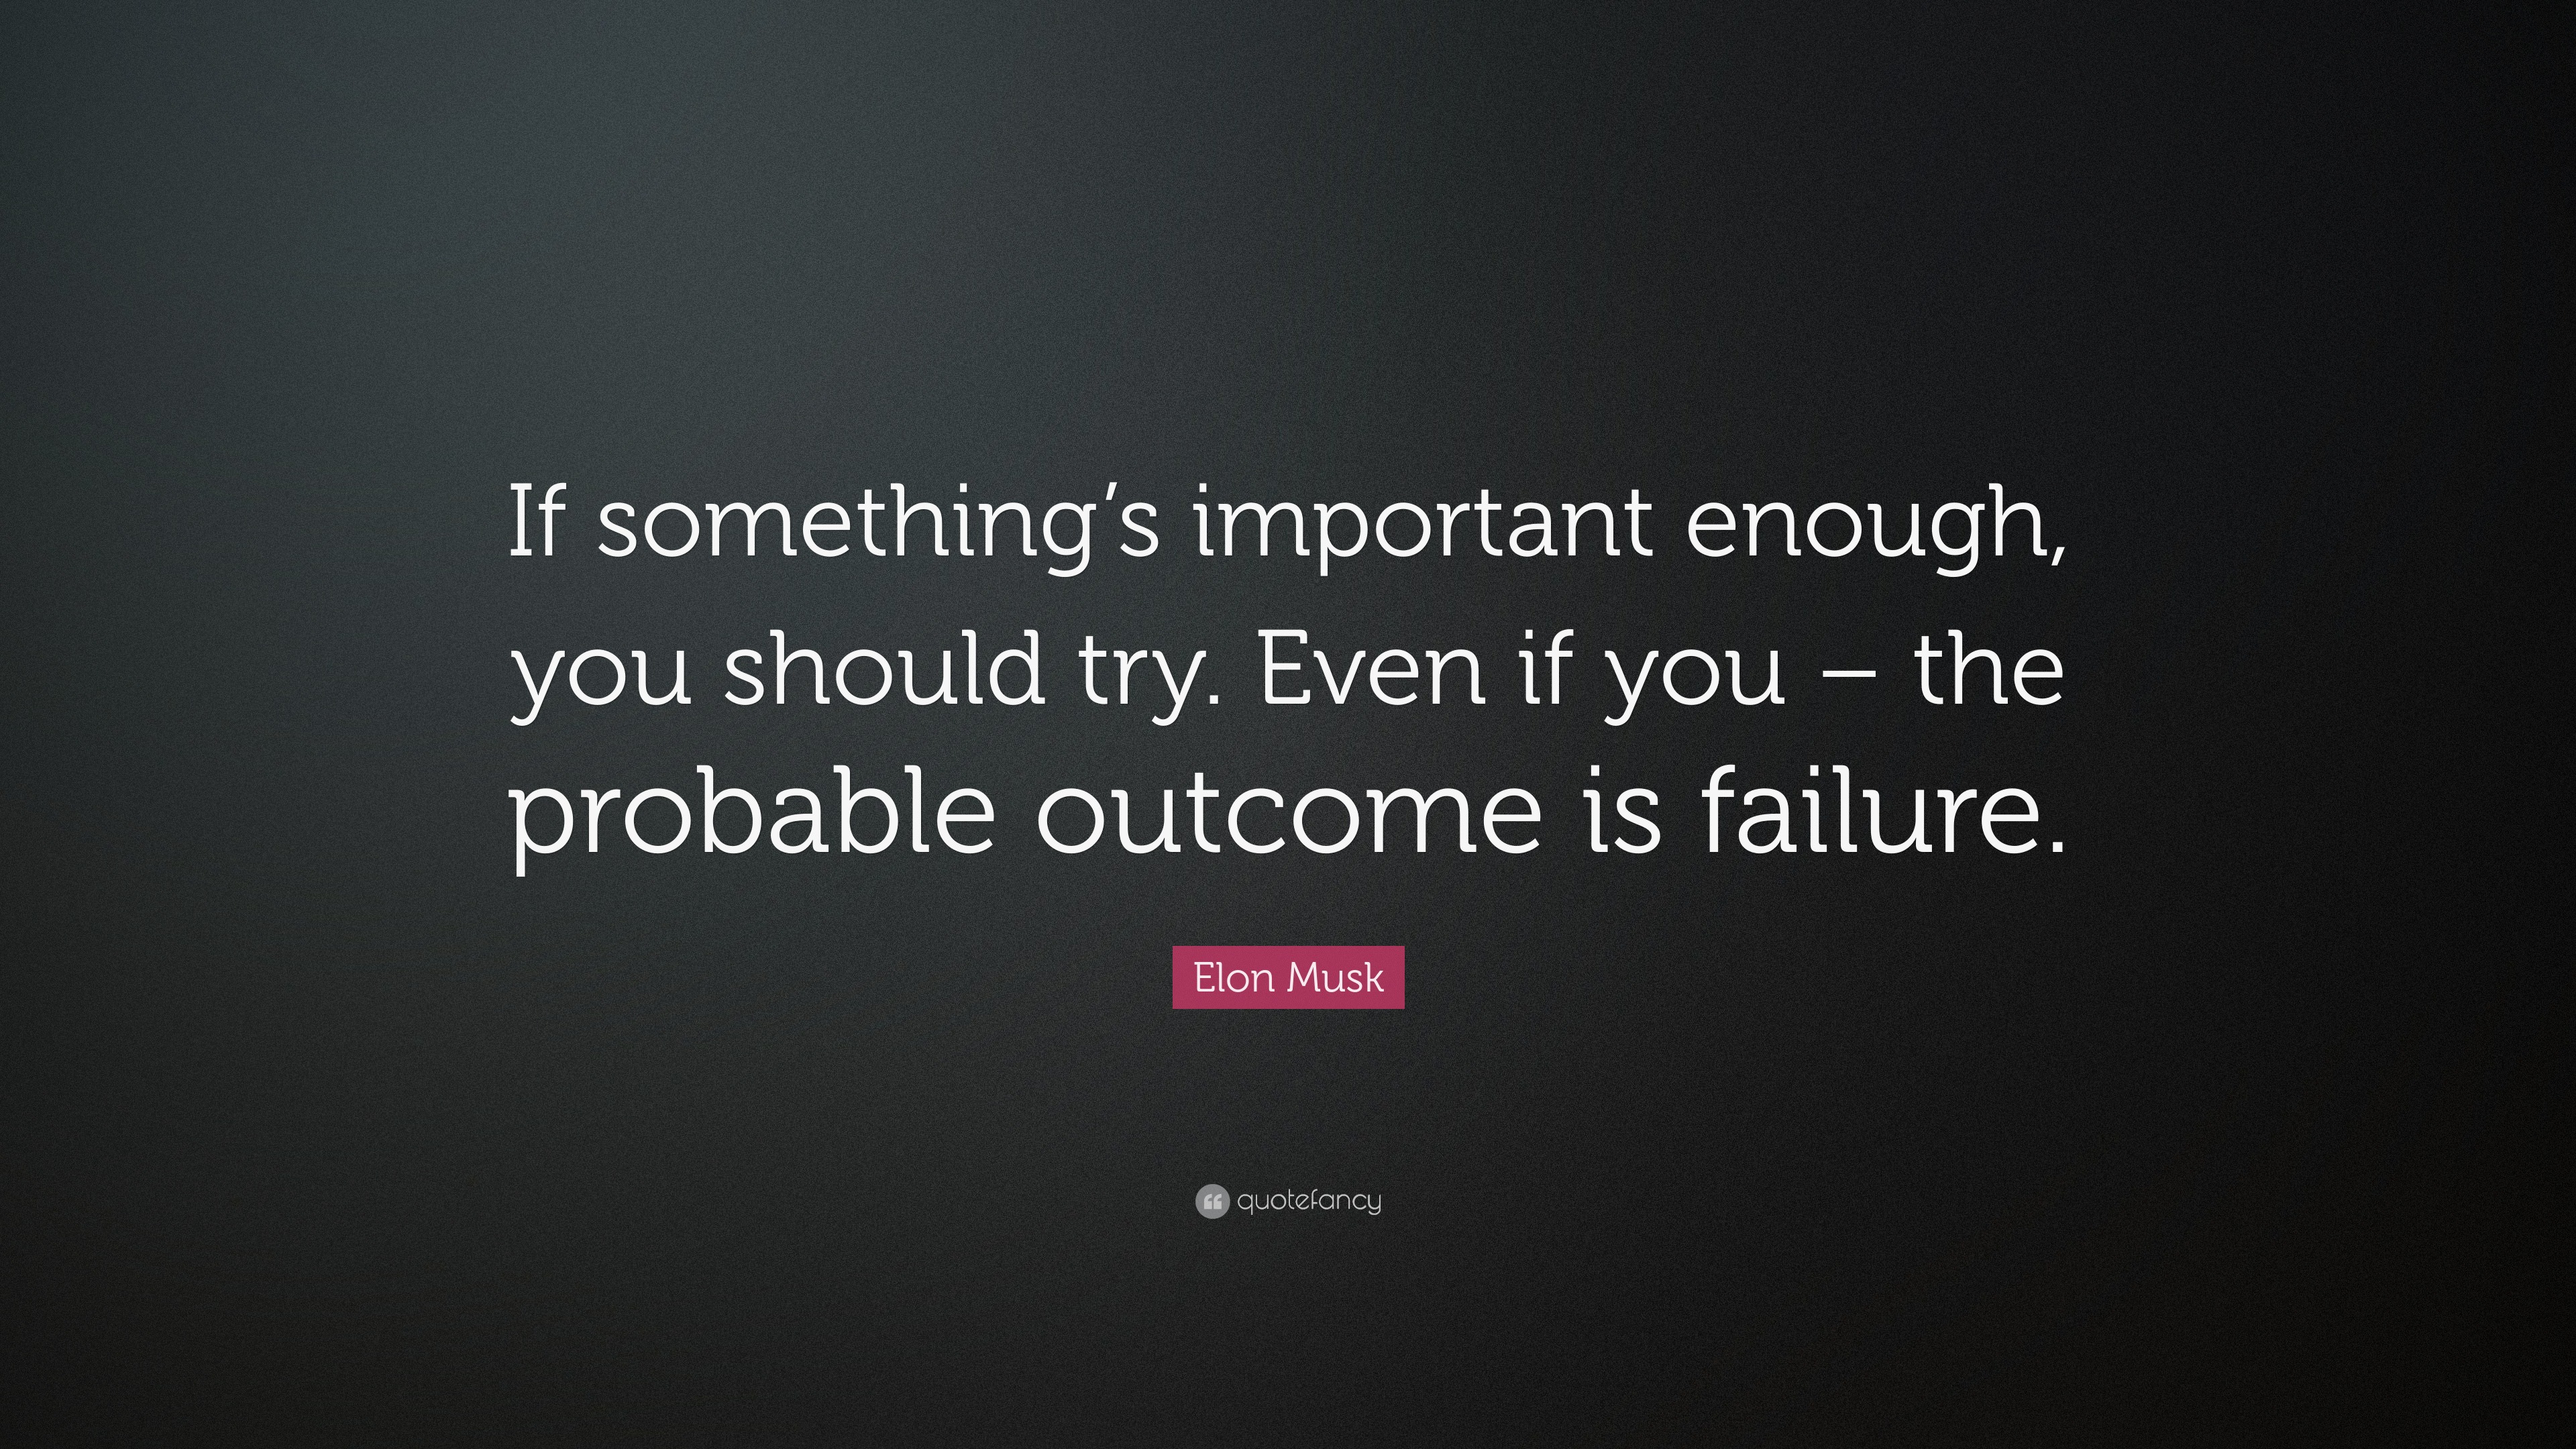 Elon Musk Quote: “If something’s important enough, you should try. Even ...